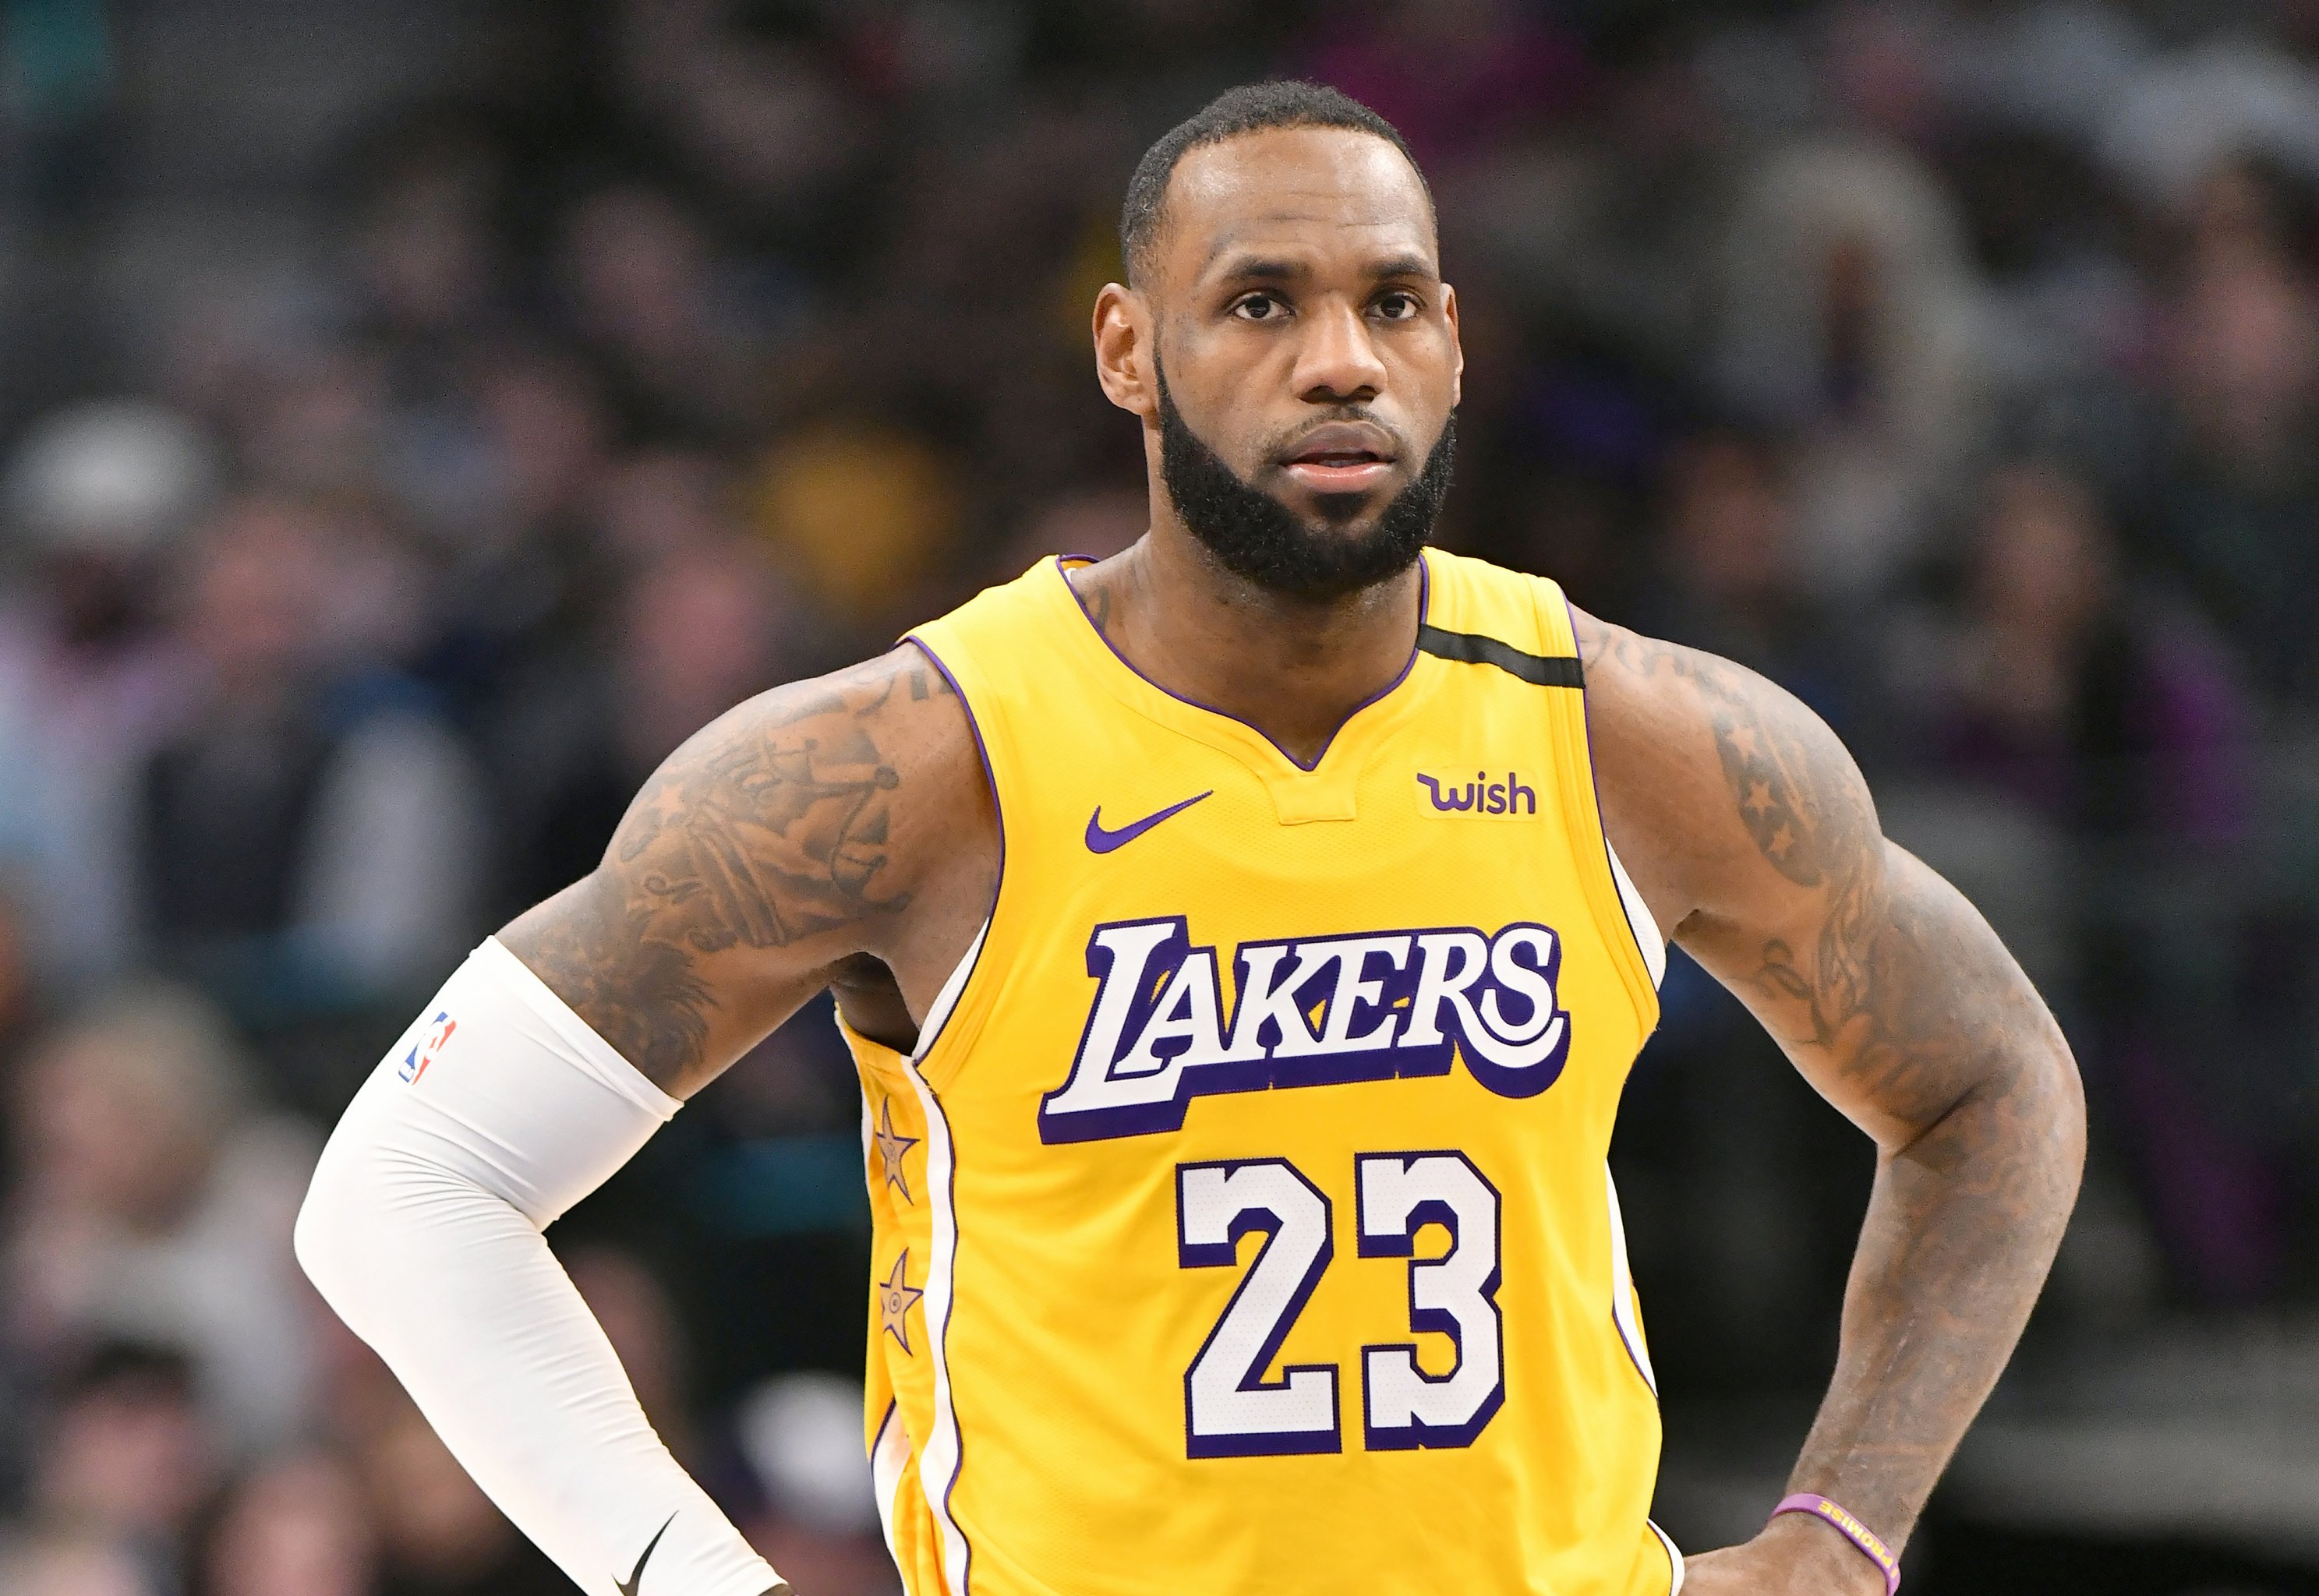 Lakers, LeBron James extend hot streak with down-to-the-wire win over Kings